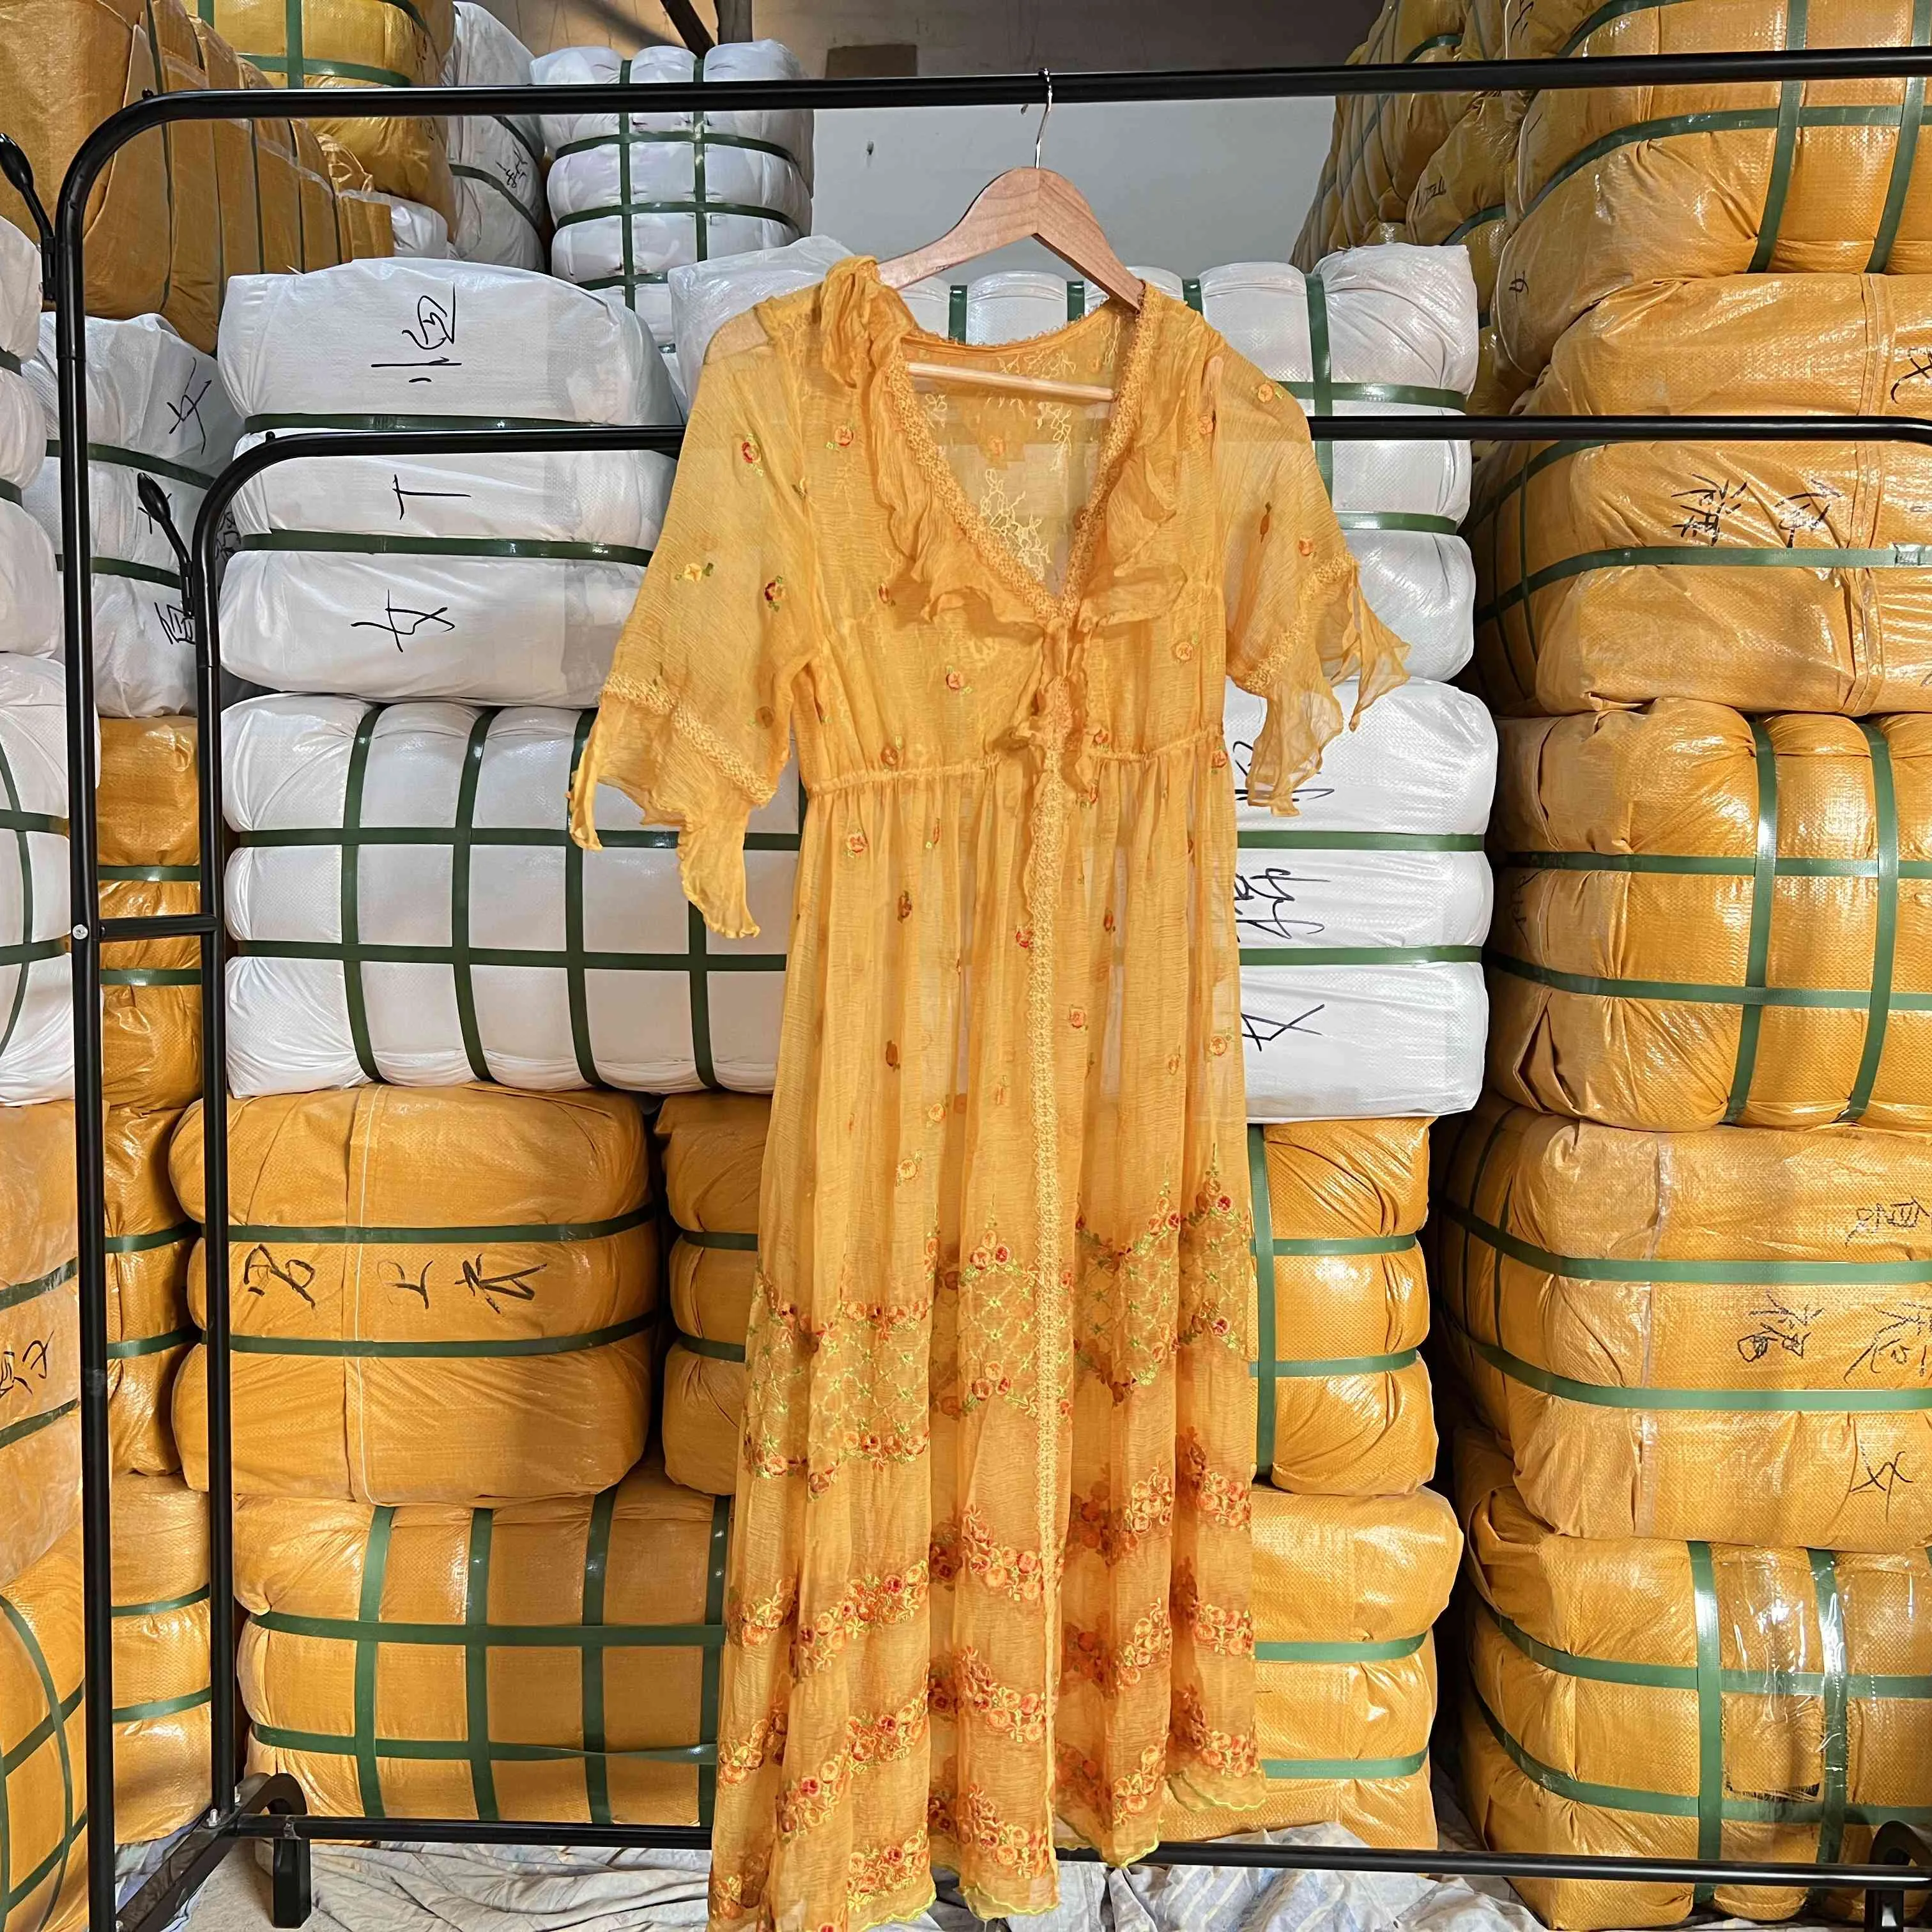 Used Dress for adult ladies bales mixed used lady clothing dubai used clothes in bales uk bales u.s.a